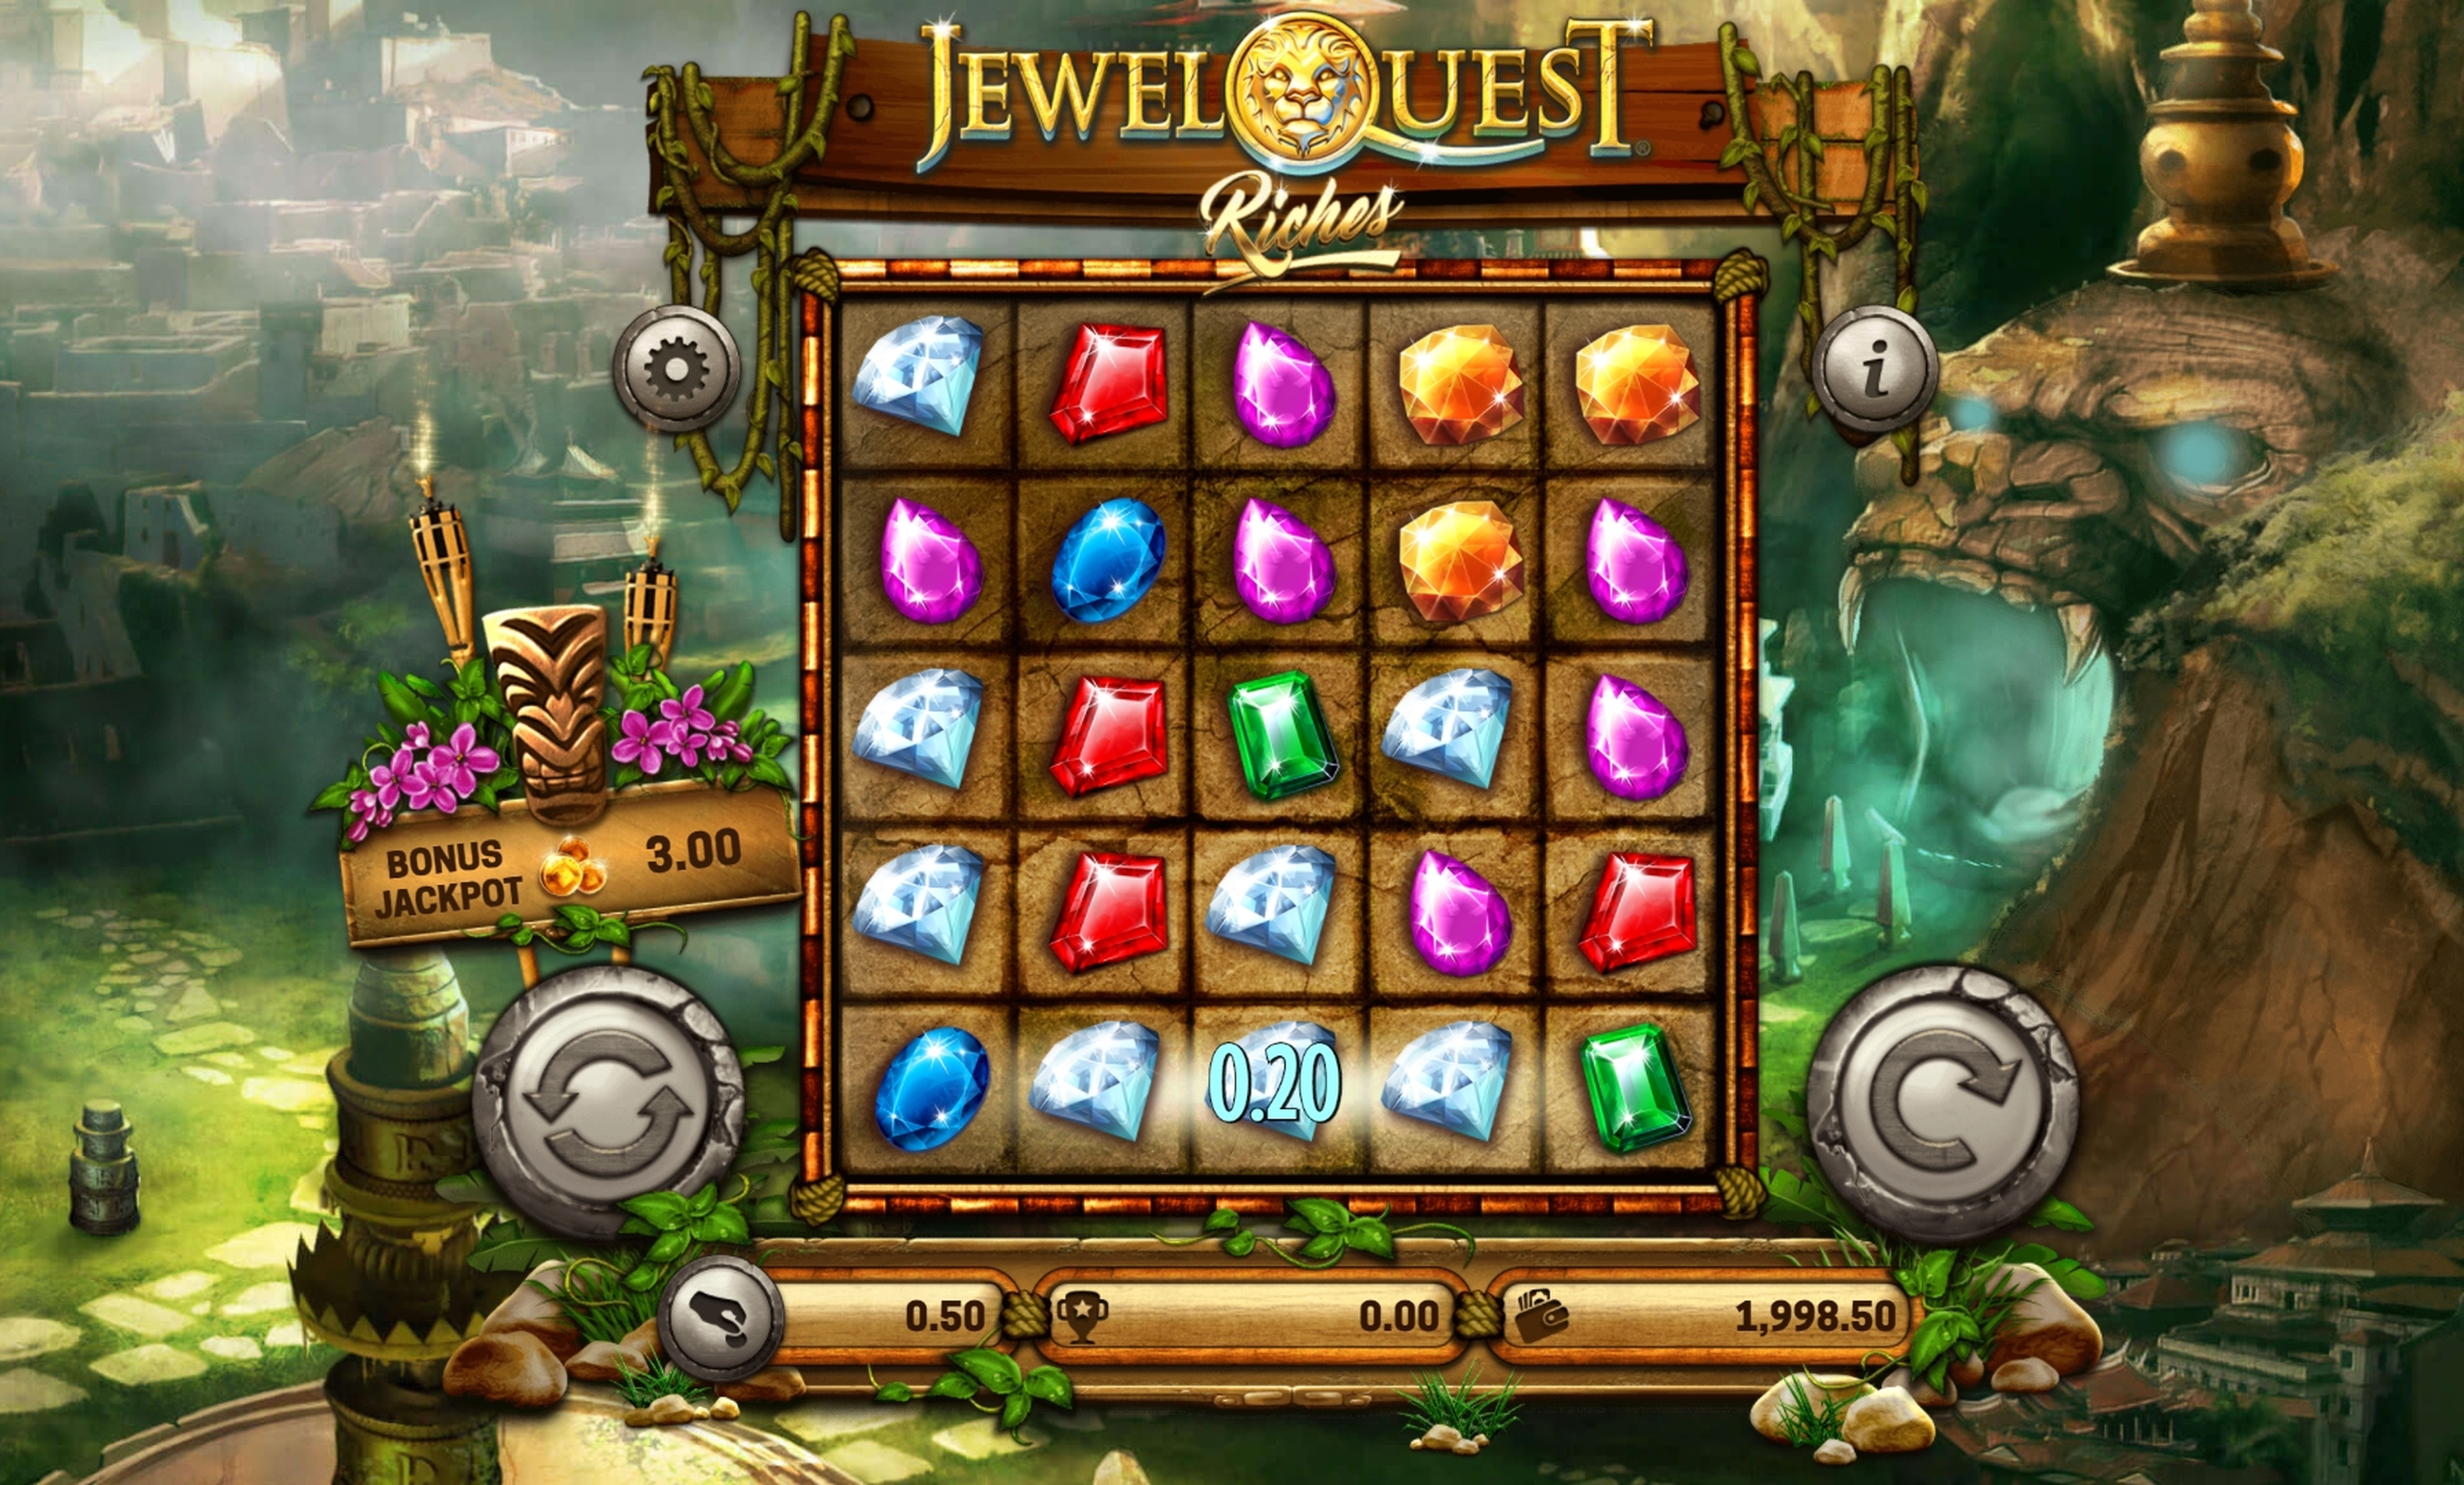 Win Money in Jewel Quest Riches Free Slot Game by Old Skool Studios